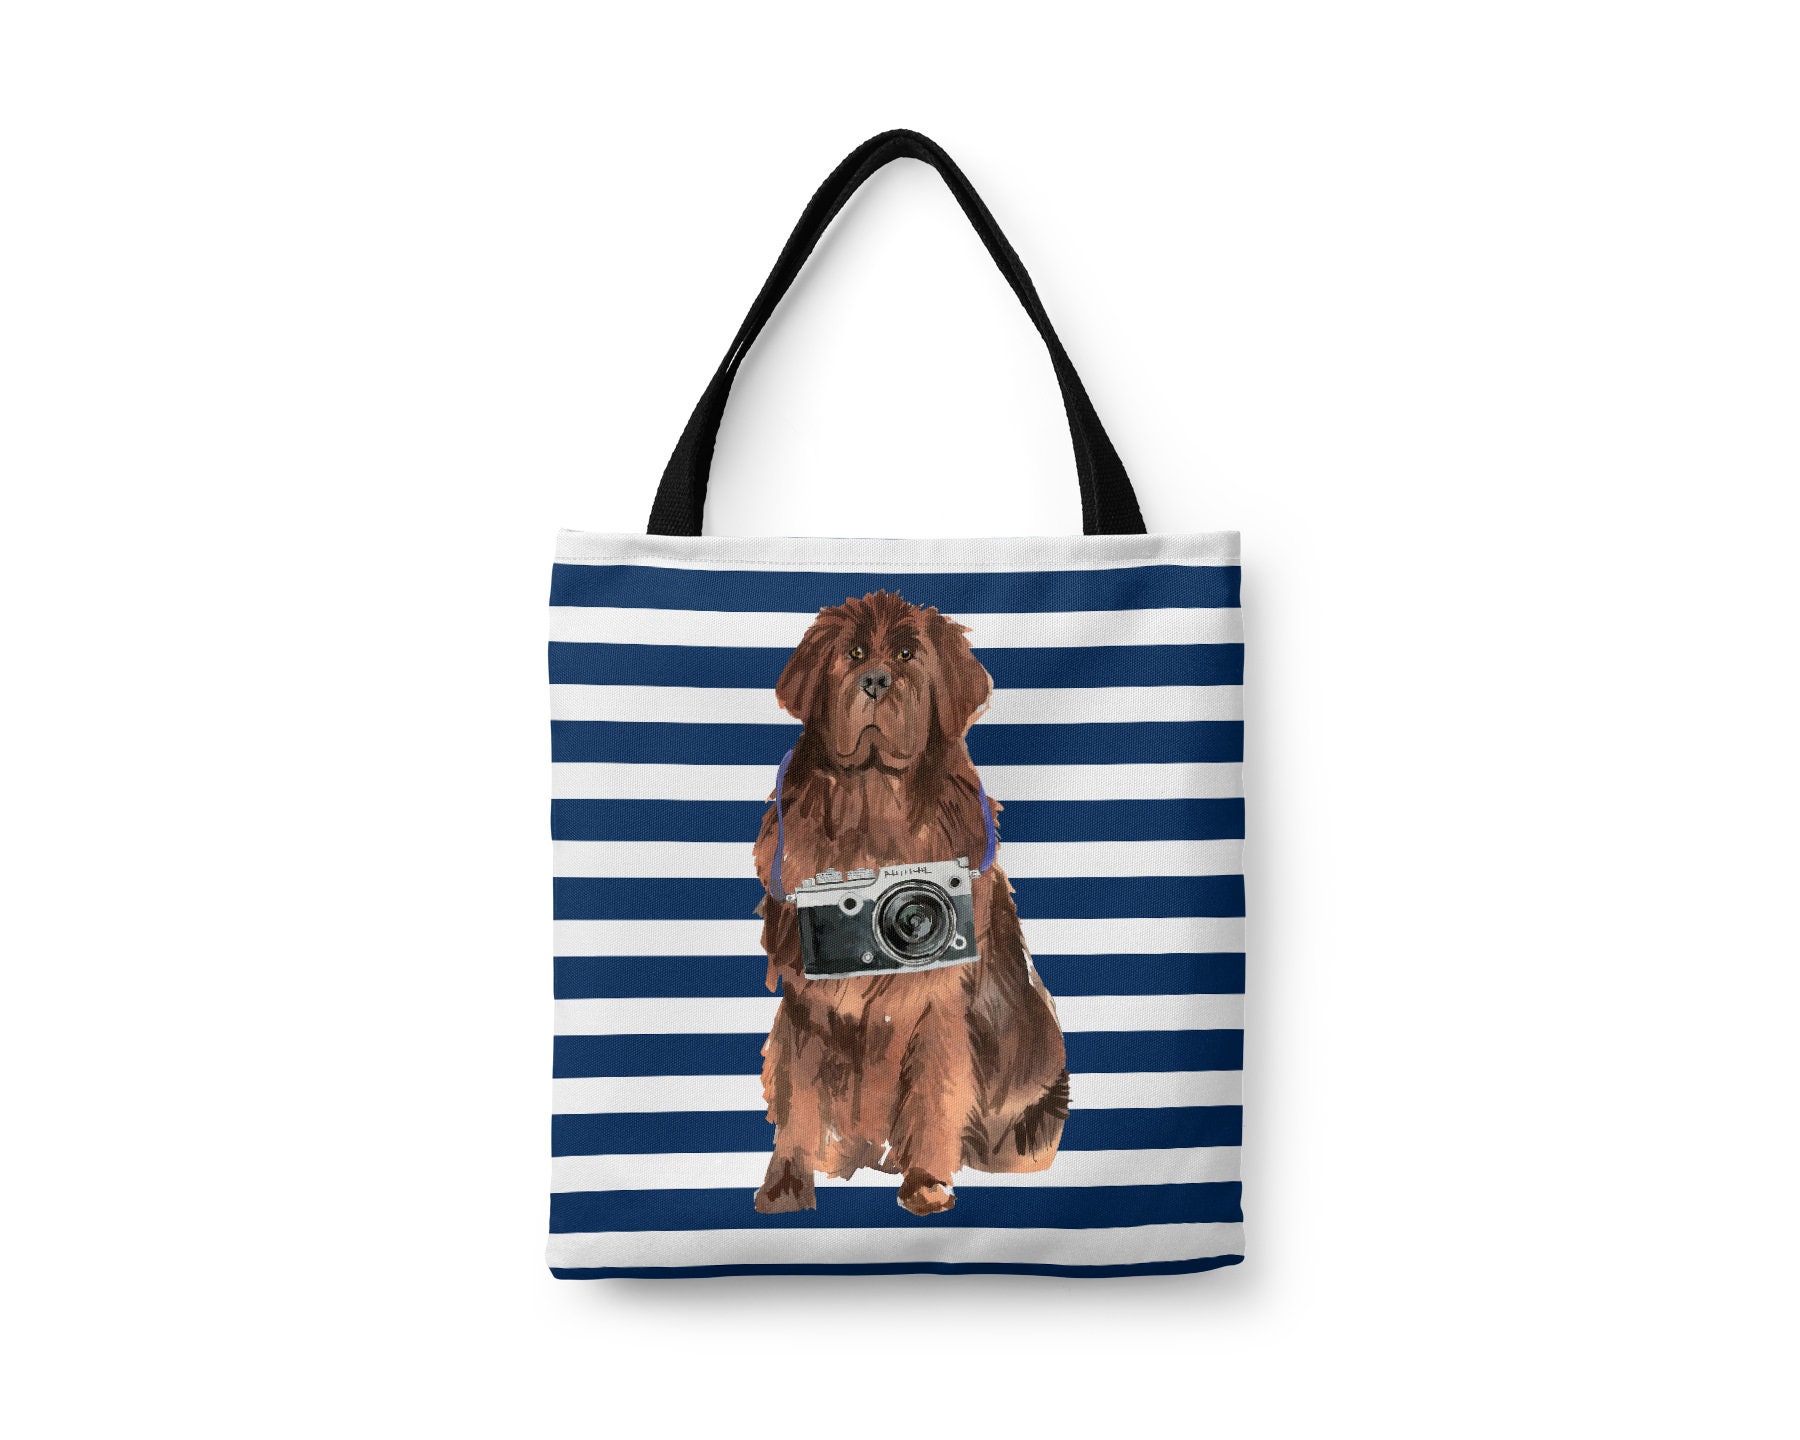 Newfoundland Dog Tote Bag - Illustrated Dogs & 6 Travel Inspired Styles. All Purpose For Work, Shopping, Life. Newf, Newfie Shoulder Bag